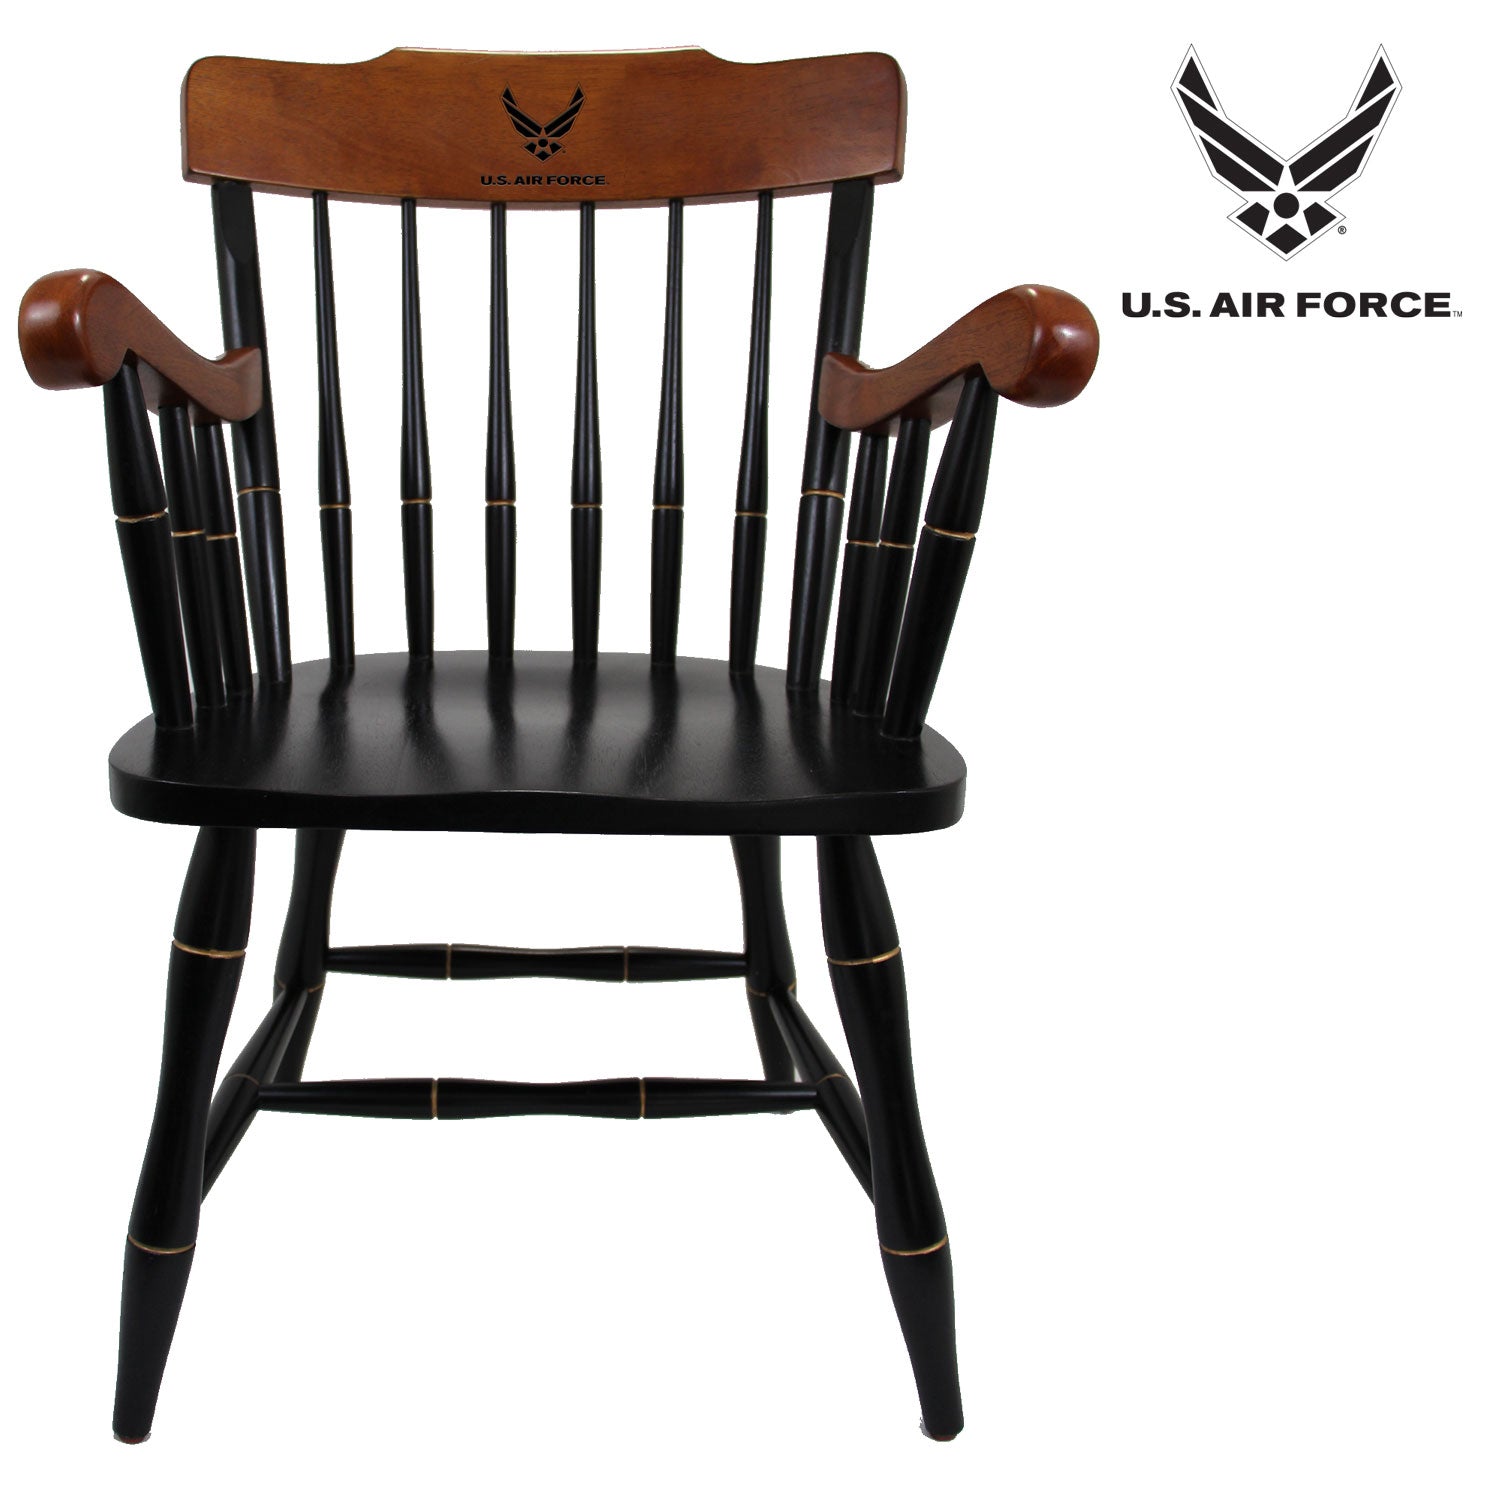 Air Force Wings Wooden Captain Chair (Black - Cherry Arms & Crown)